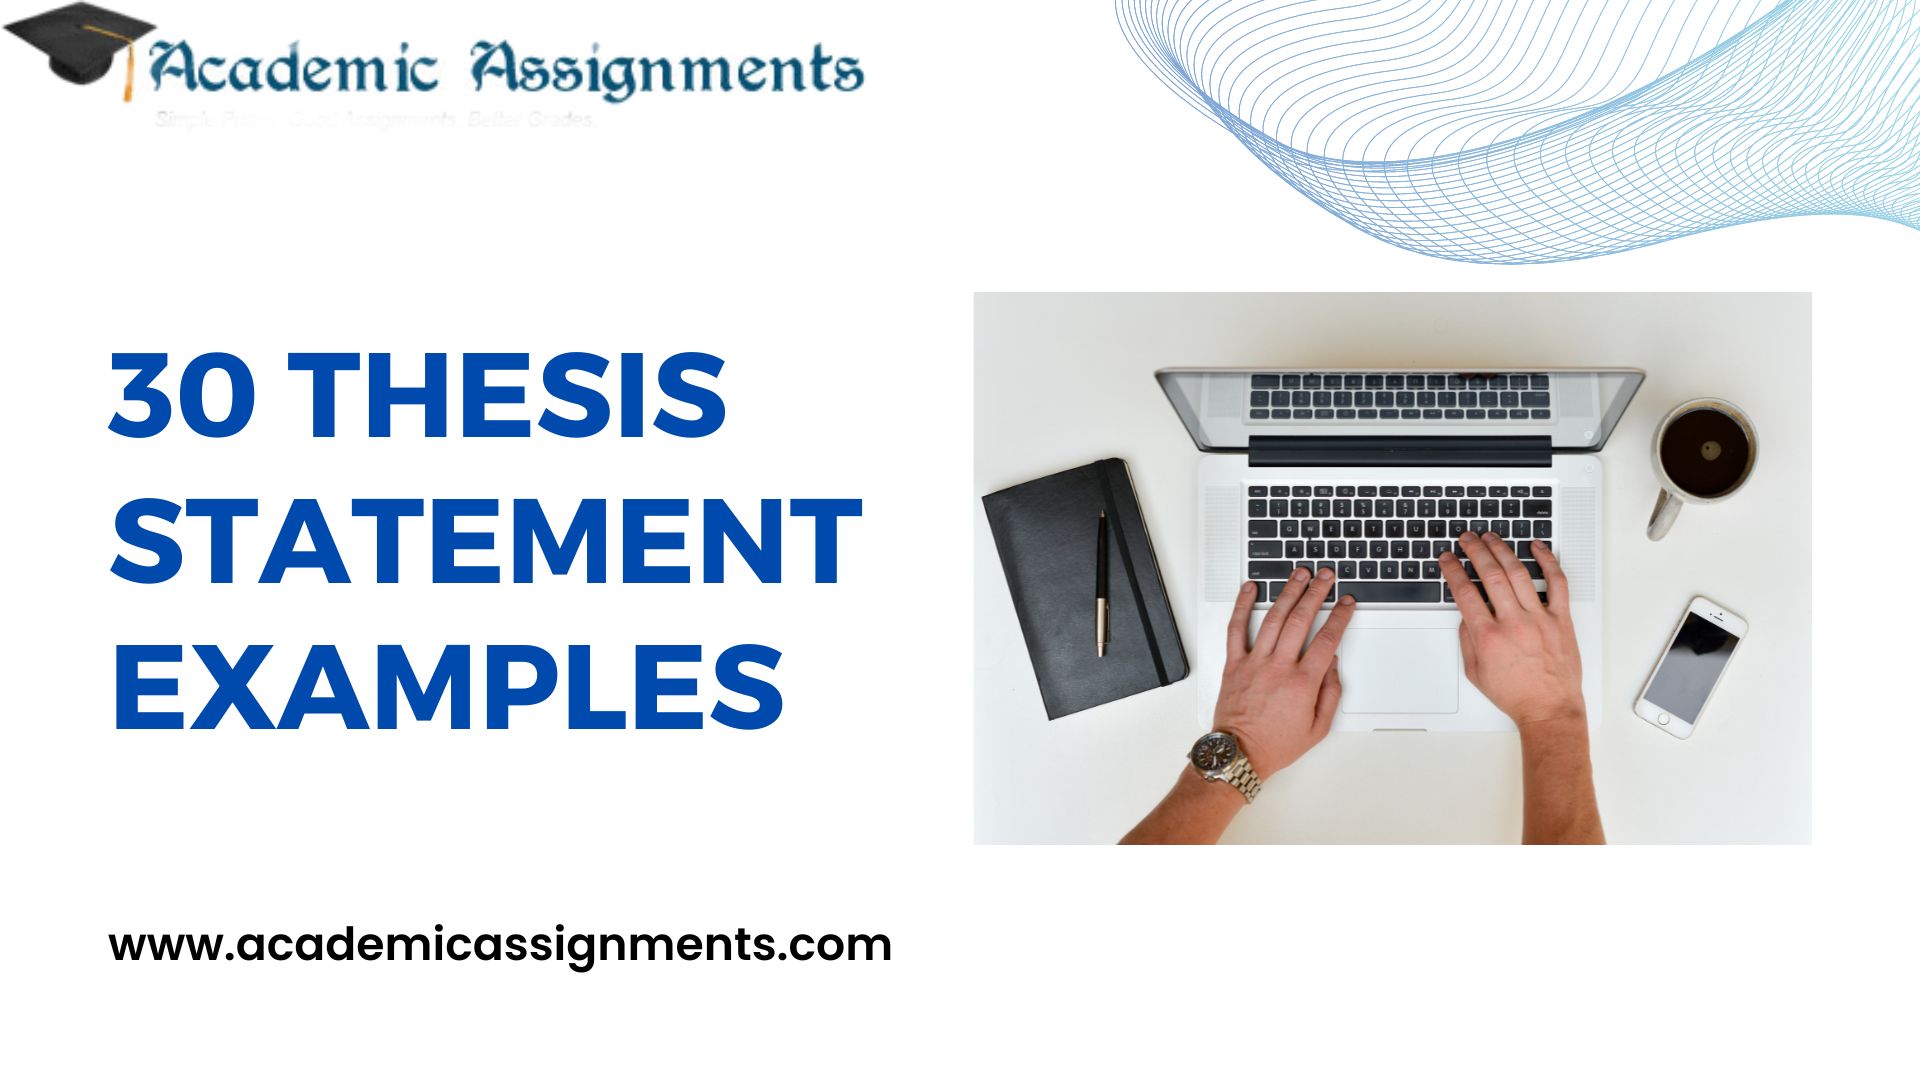 30 Thesis Statement Examples